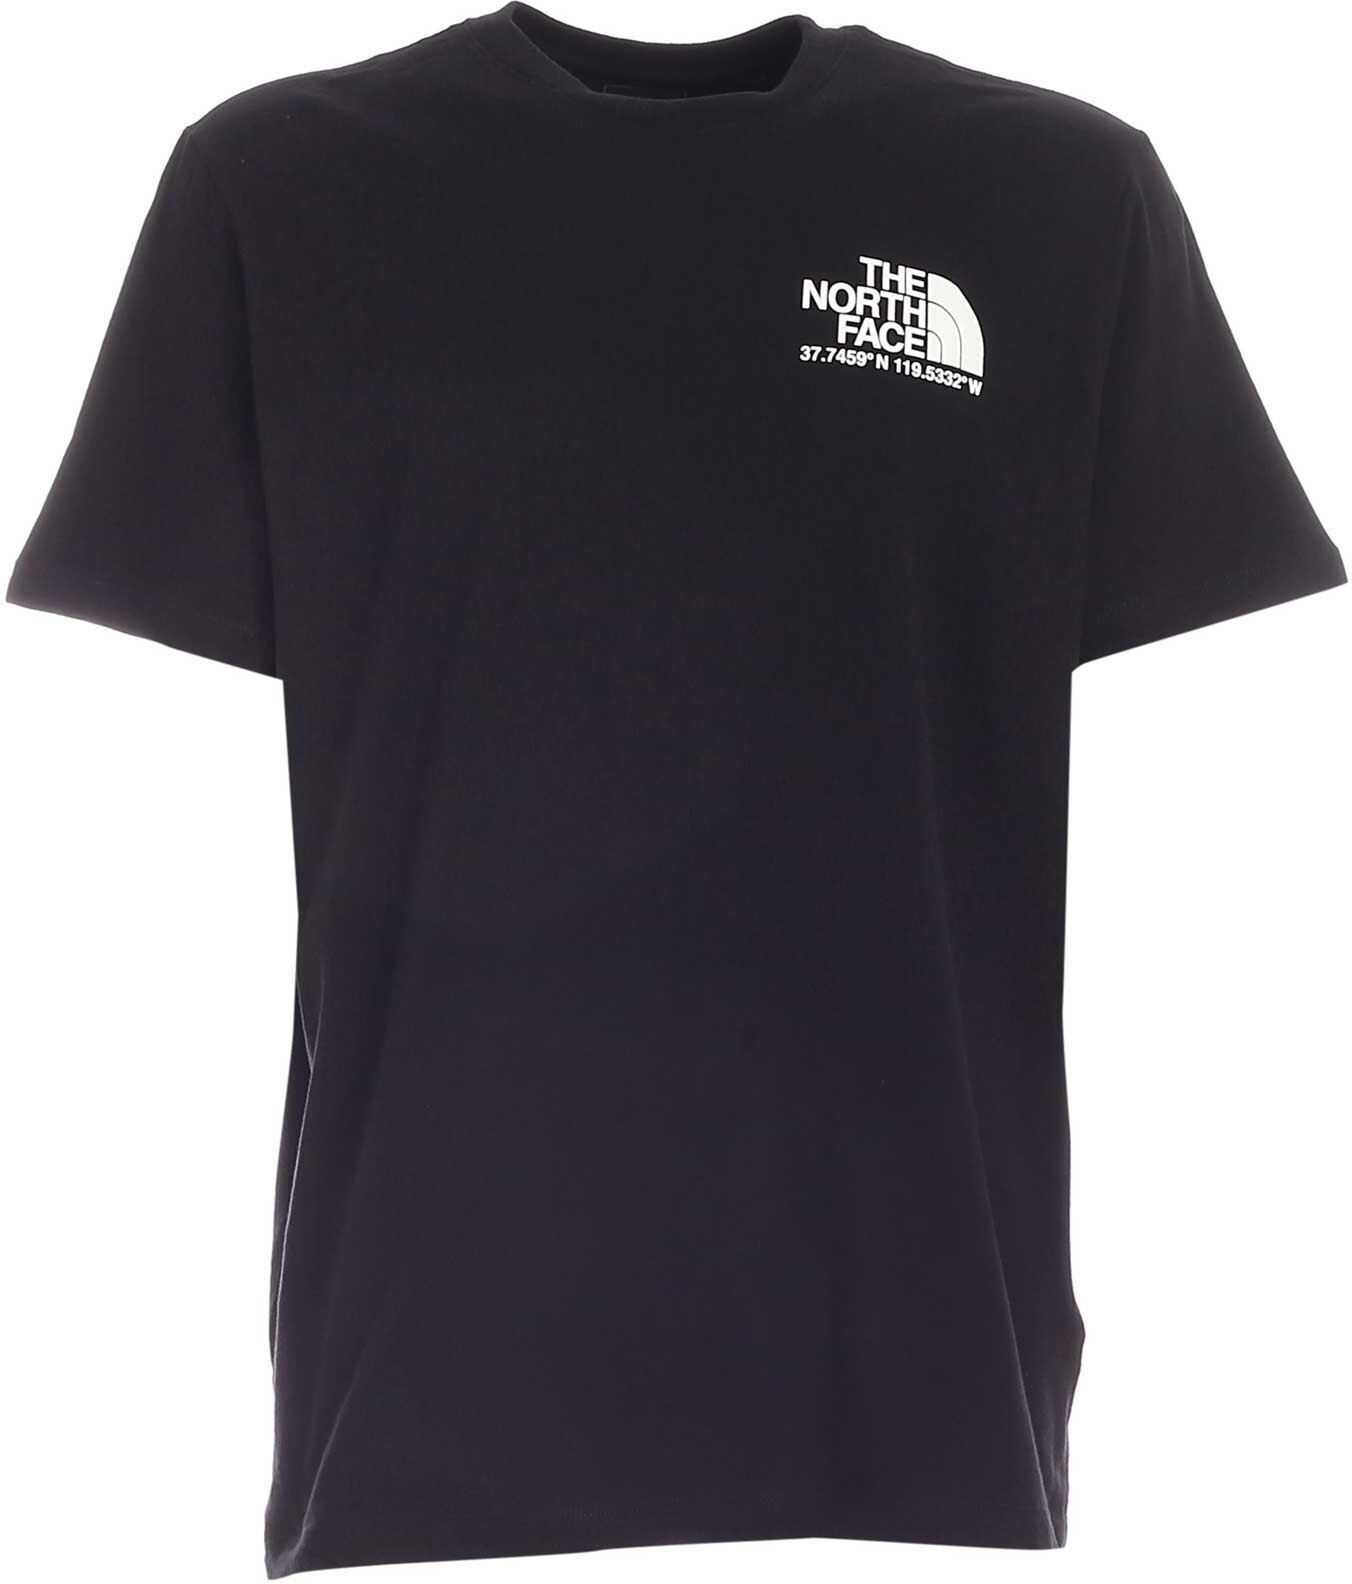 The North Face Coordinates T-Shirt In Black NF0A52Y8JK31 Black